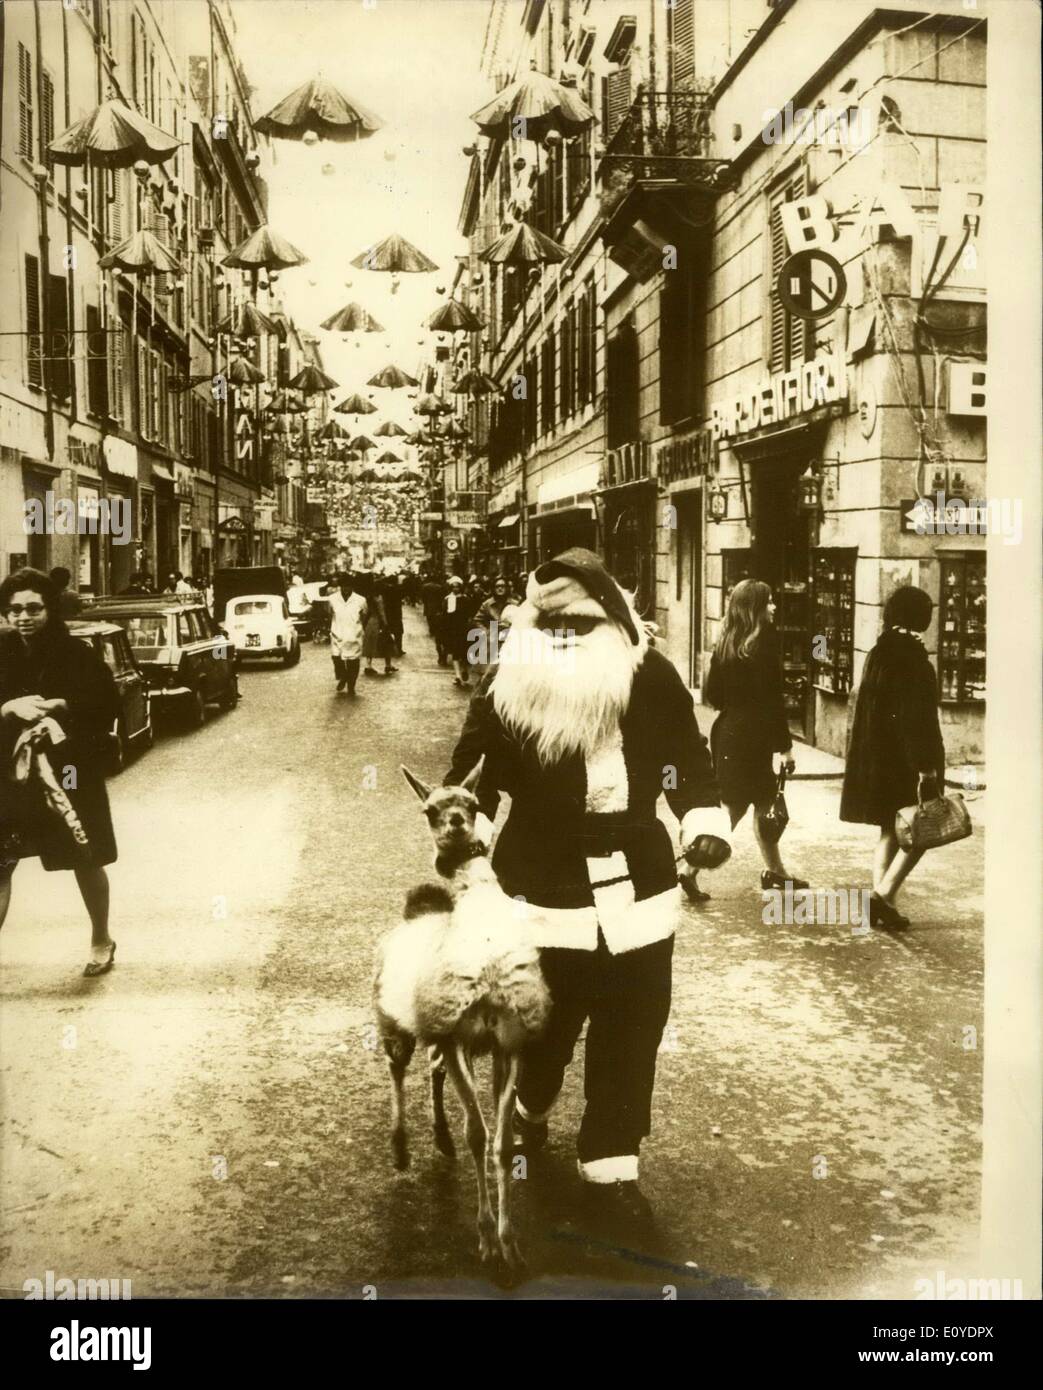 Dec. 15, 1969 - The Christmas scene in Rome.: Sign of the festive season as Santa Claus take a roll down the gaily decorated via Frattina in Rome. Stock Photo